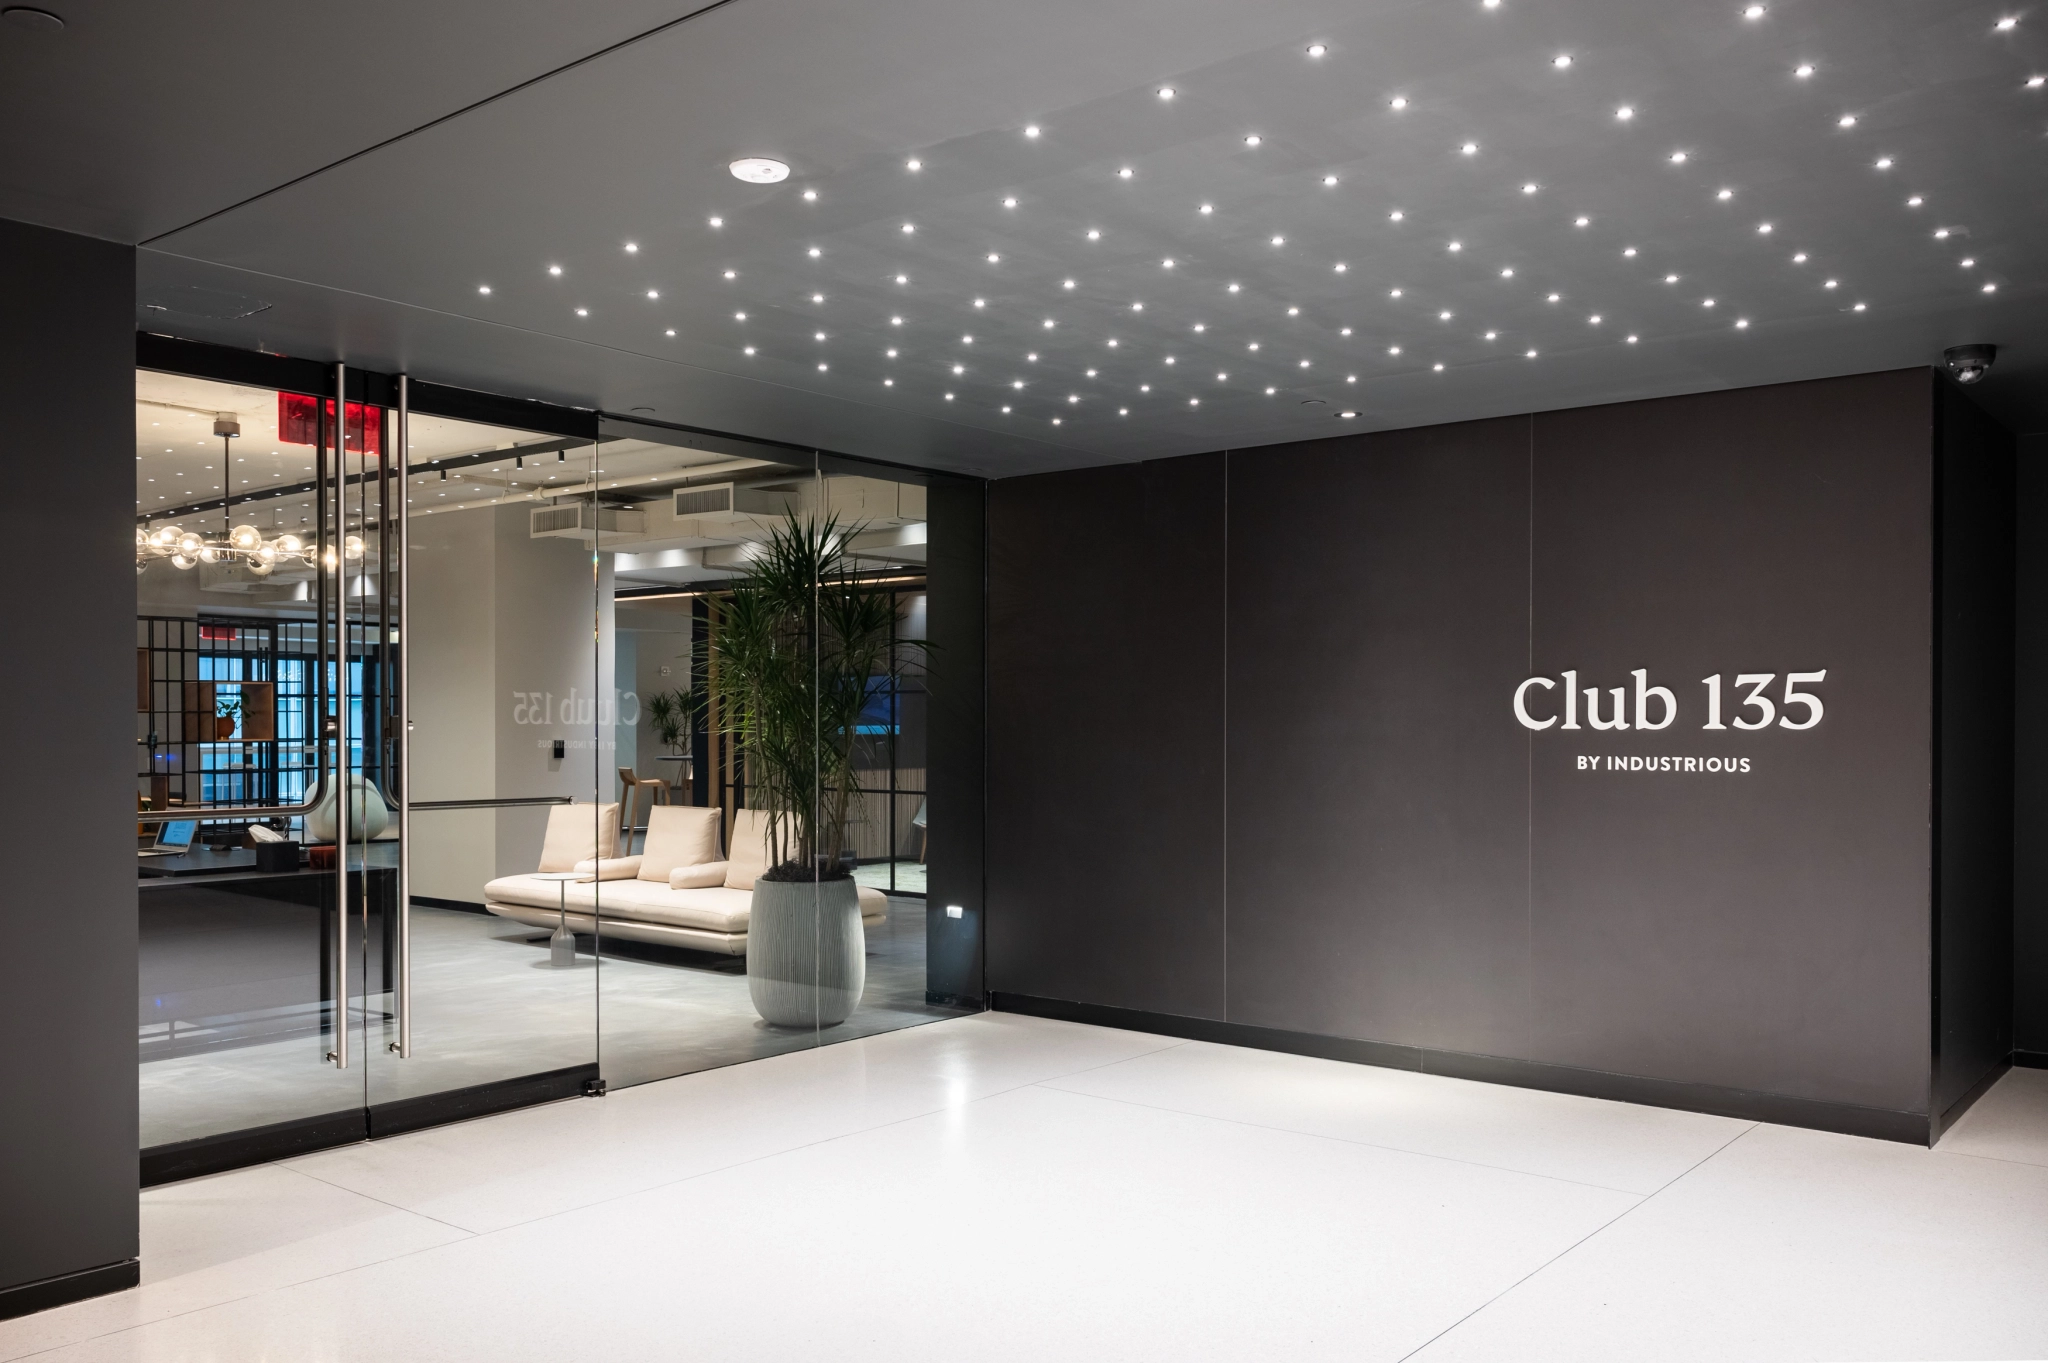 Modern office lounge area with the sign "Club 135 by Industrious" on a dark wall, illuminated by ceiling lights, and furnished with sofas and a plant near glass doors, seamlessly blending into the adjacent coworking workspace.